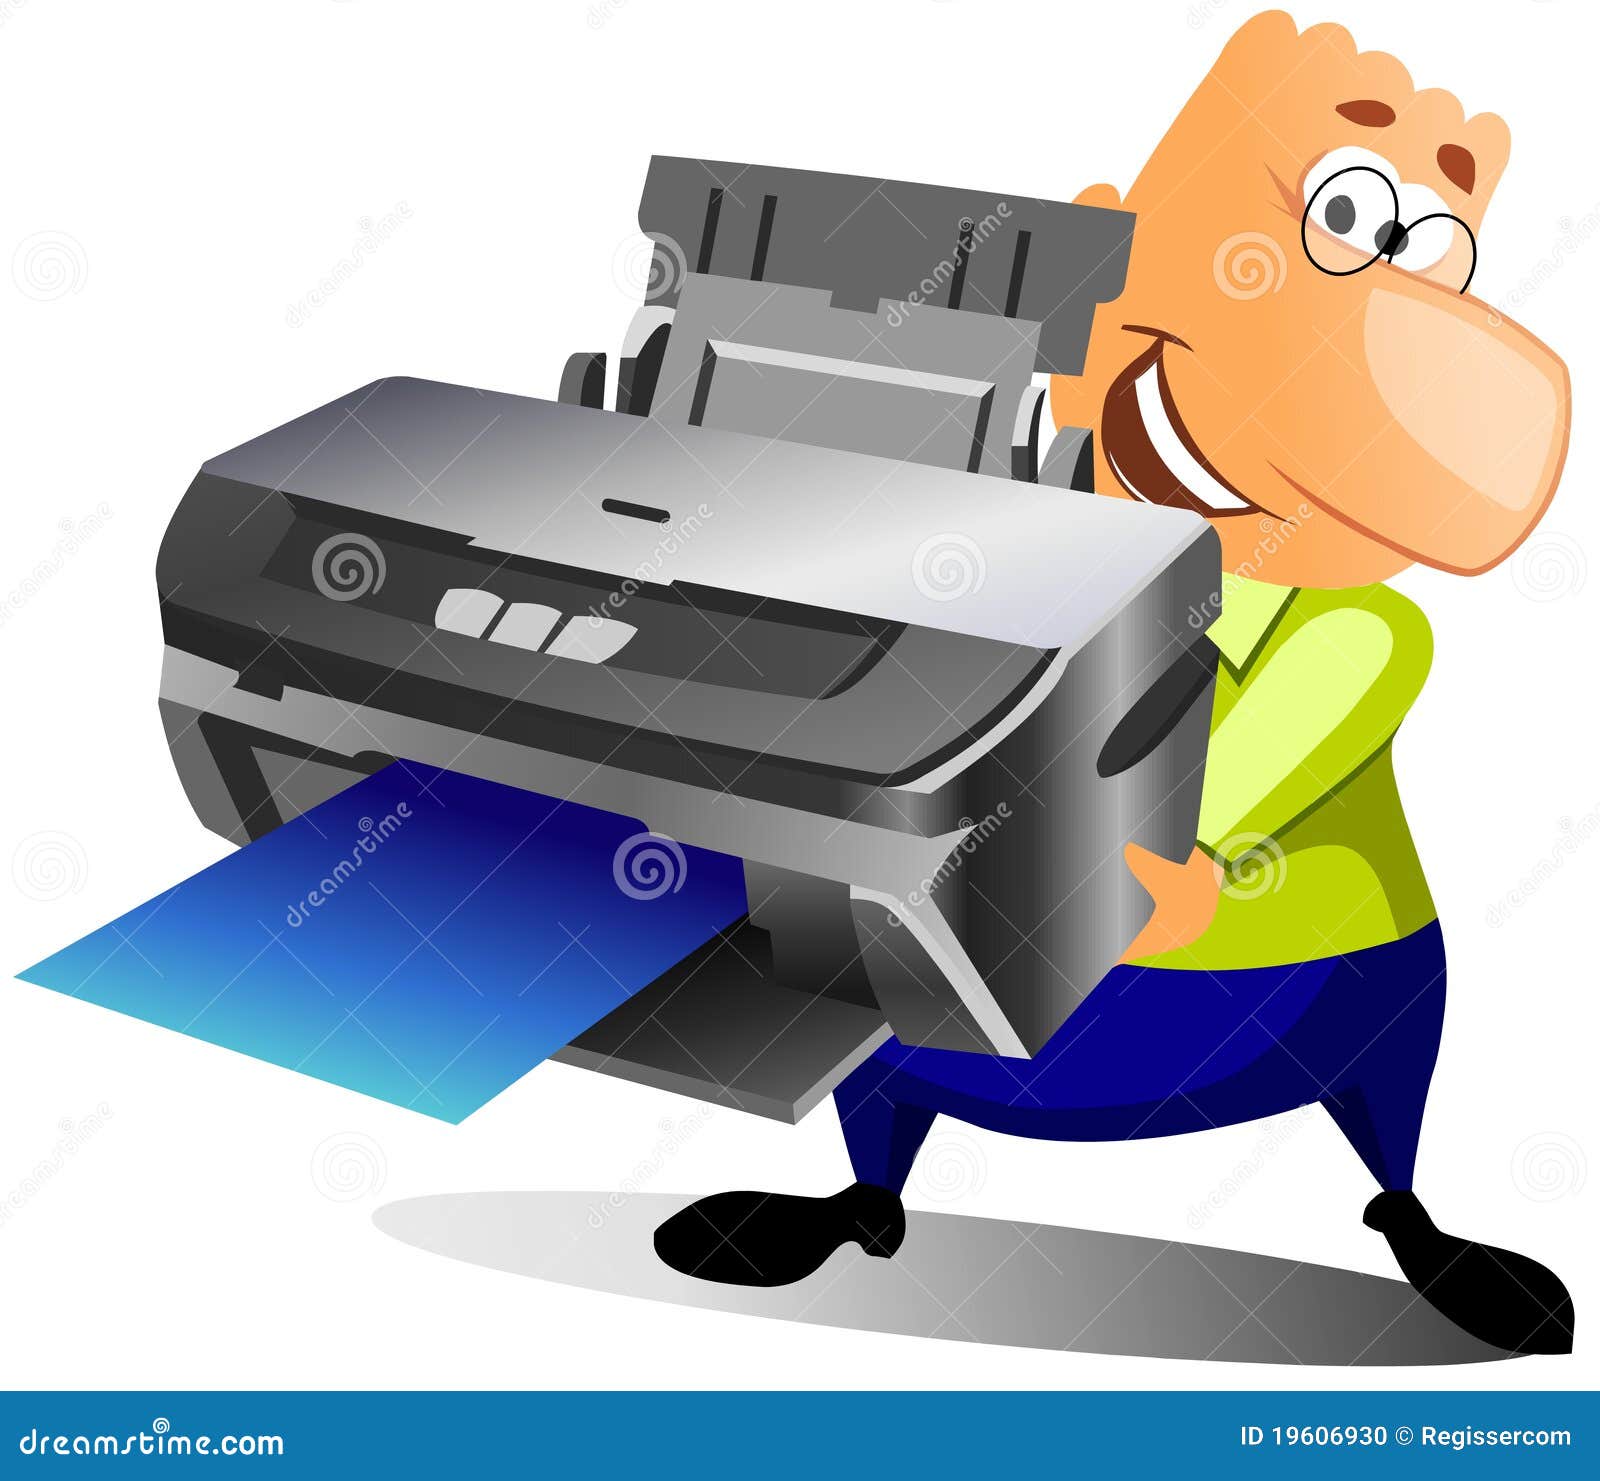 clipart printer pictures - photo #46